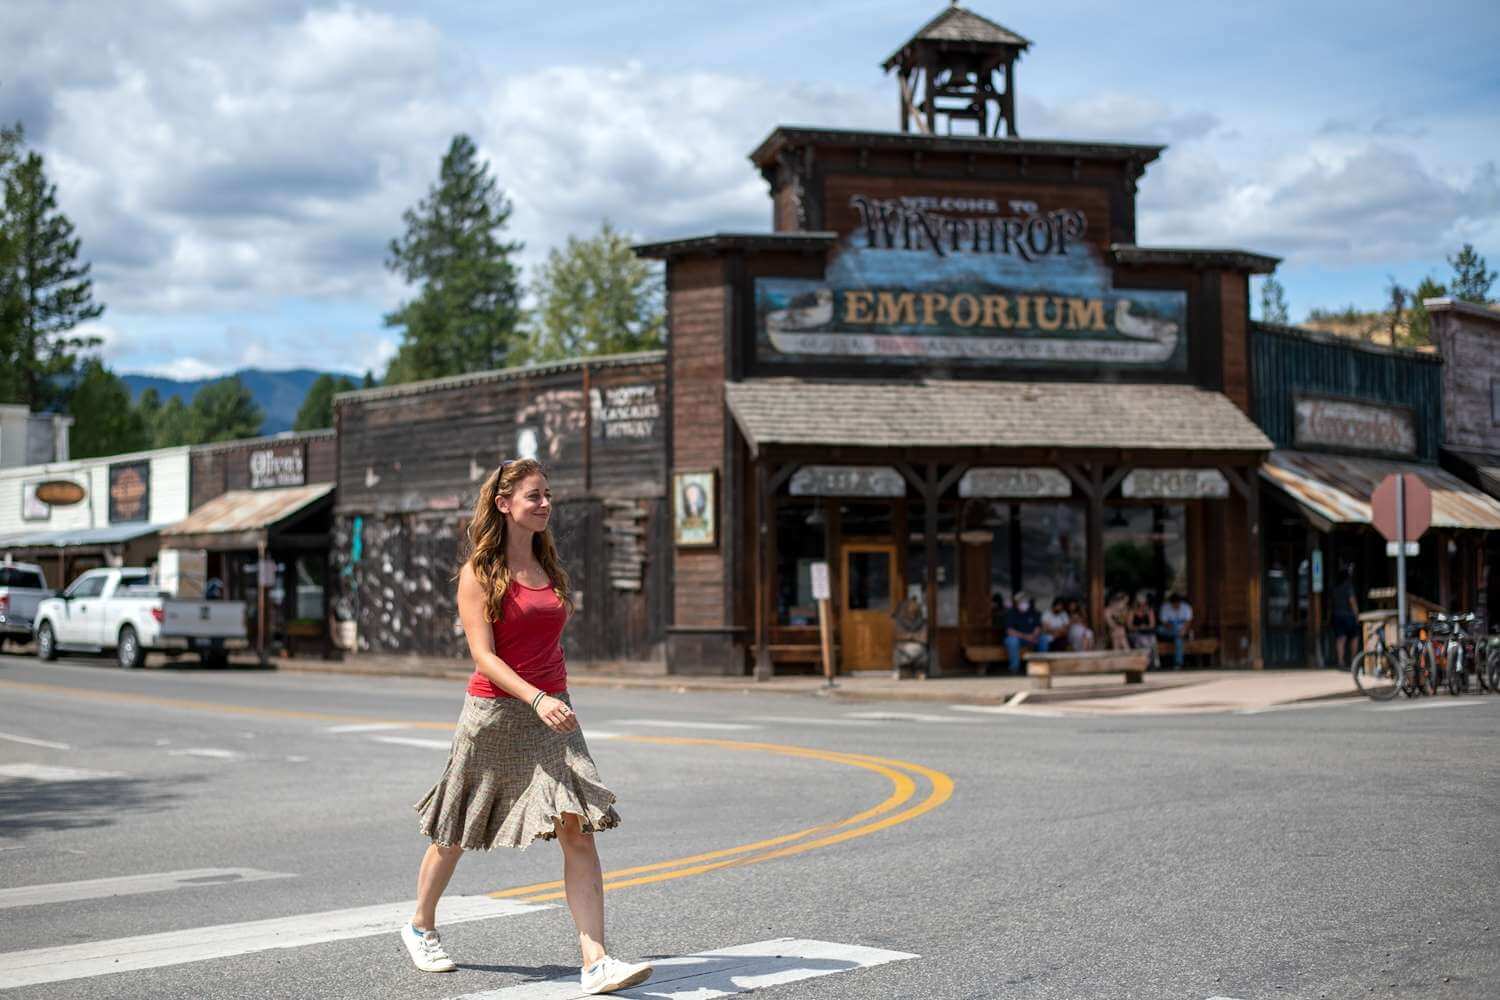 A woman walks across the street in front of an Old-West style building in Winthrop.